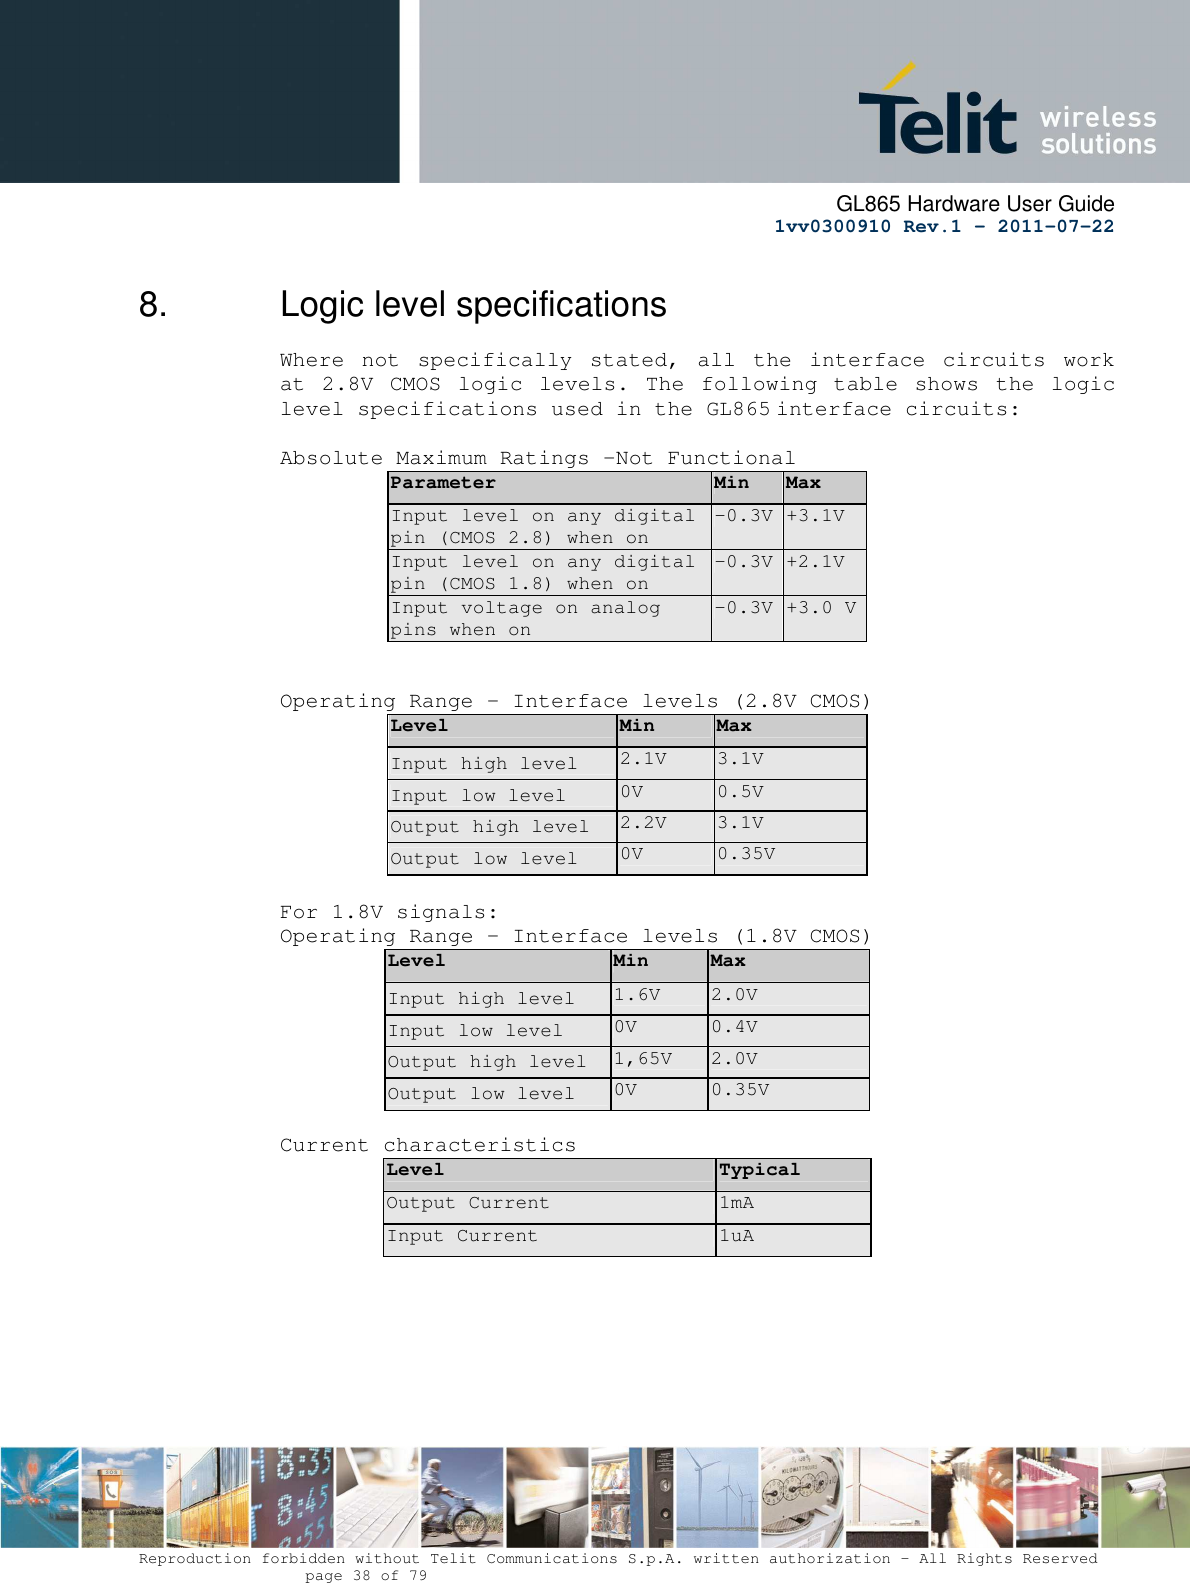      GL865 Hardware User Guide     1vv0300910 Rev.1 – 2011-07-22       Reproduction forbidden without Telit Communications S.p.A. written authorization - All Rights Reserved    page 38 of 79  8.  Logic level specifications Where  not  specifically  stated,  all  the  interface  circuits  work at  2.8V  CMOS  logic  levels.  The  following  table  shows  the  logic level specifications used in the GL865 interface circuits:  Absolute Maximum Ratings -Not Functional Parameter  Min  Max Input level on any digital pin (CMOS 2.8) when on -0.3V +3.1V Input level on any digital pin (CMOS 1.8) when on -0.3V +2.1V Input voltage on analog pins when on -0.3V +3.0 V   Operating Range - Interface levels (2.8V CMOS) Level  Min  Max Input high level  2.1V  3.1V Input low level  0V  0.5V Output high level  2.2V  3.1V Output low level  0V  0.35V  For 1.8V signals: Operating Range - Interface levels (1.8V CMOS) Level  Min  Max Input high level  1.6V  2.0V Input low level  0V  0.4V Output high level  1,65V  2.0V Output low level  0V  0.35V  Current characteristics Level  Typical Output Current  1mA Input Current  1uA 